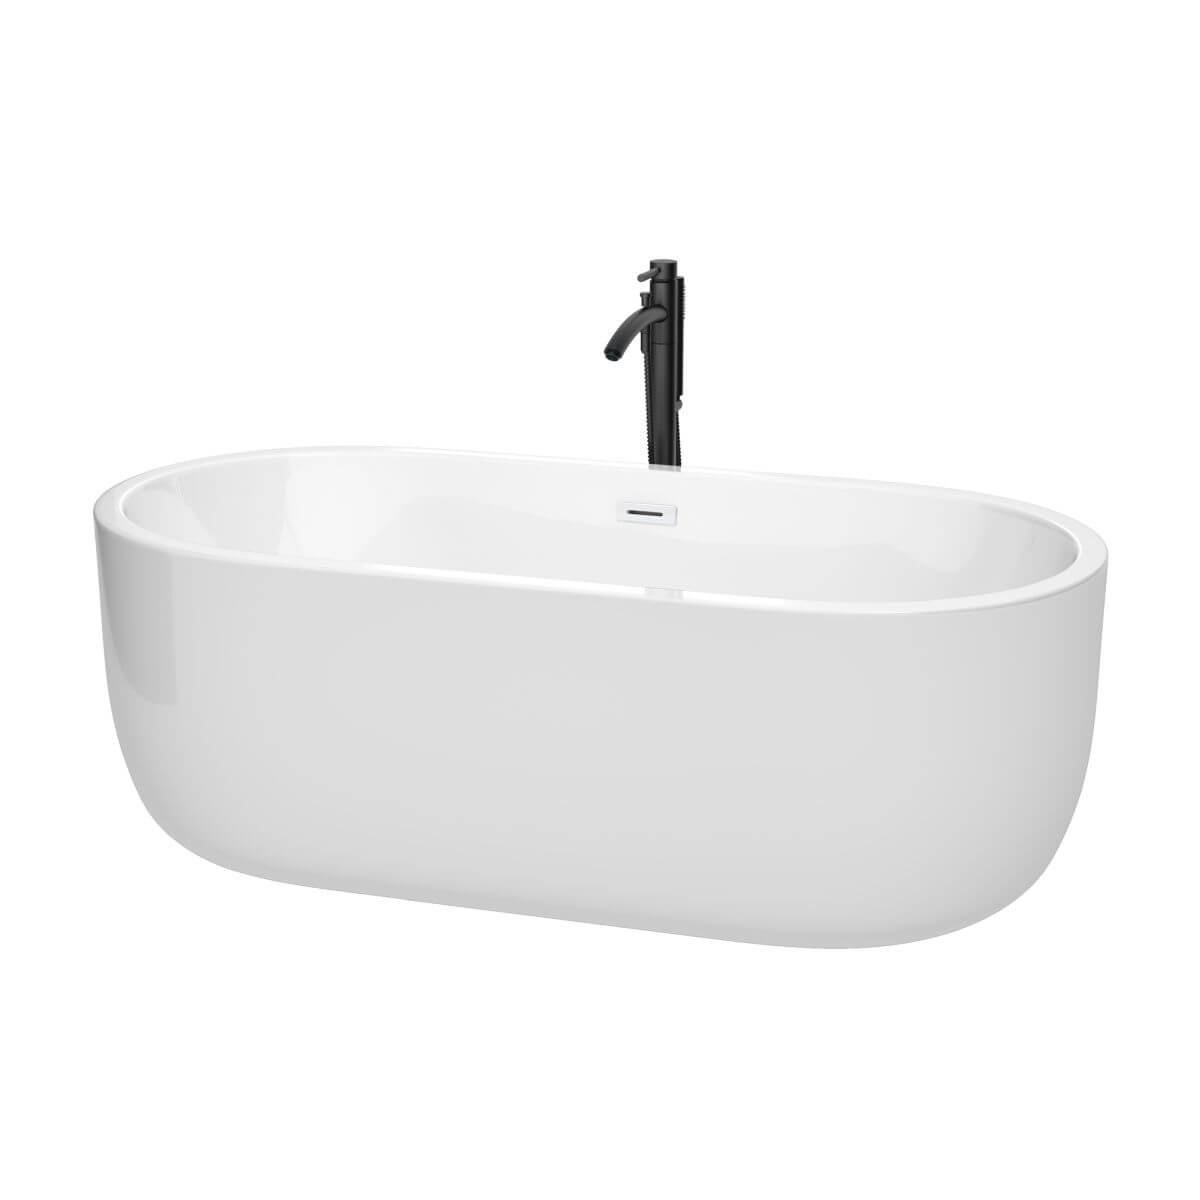 Wyndham Collection Juliette 67 inch Freestanding Bathtub in White with Shiny White Trim and Floor Mounted Faucet in Matte Black - WCOBT101367SWATPBK